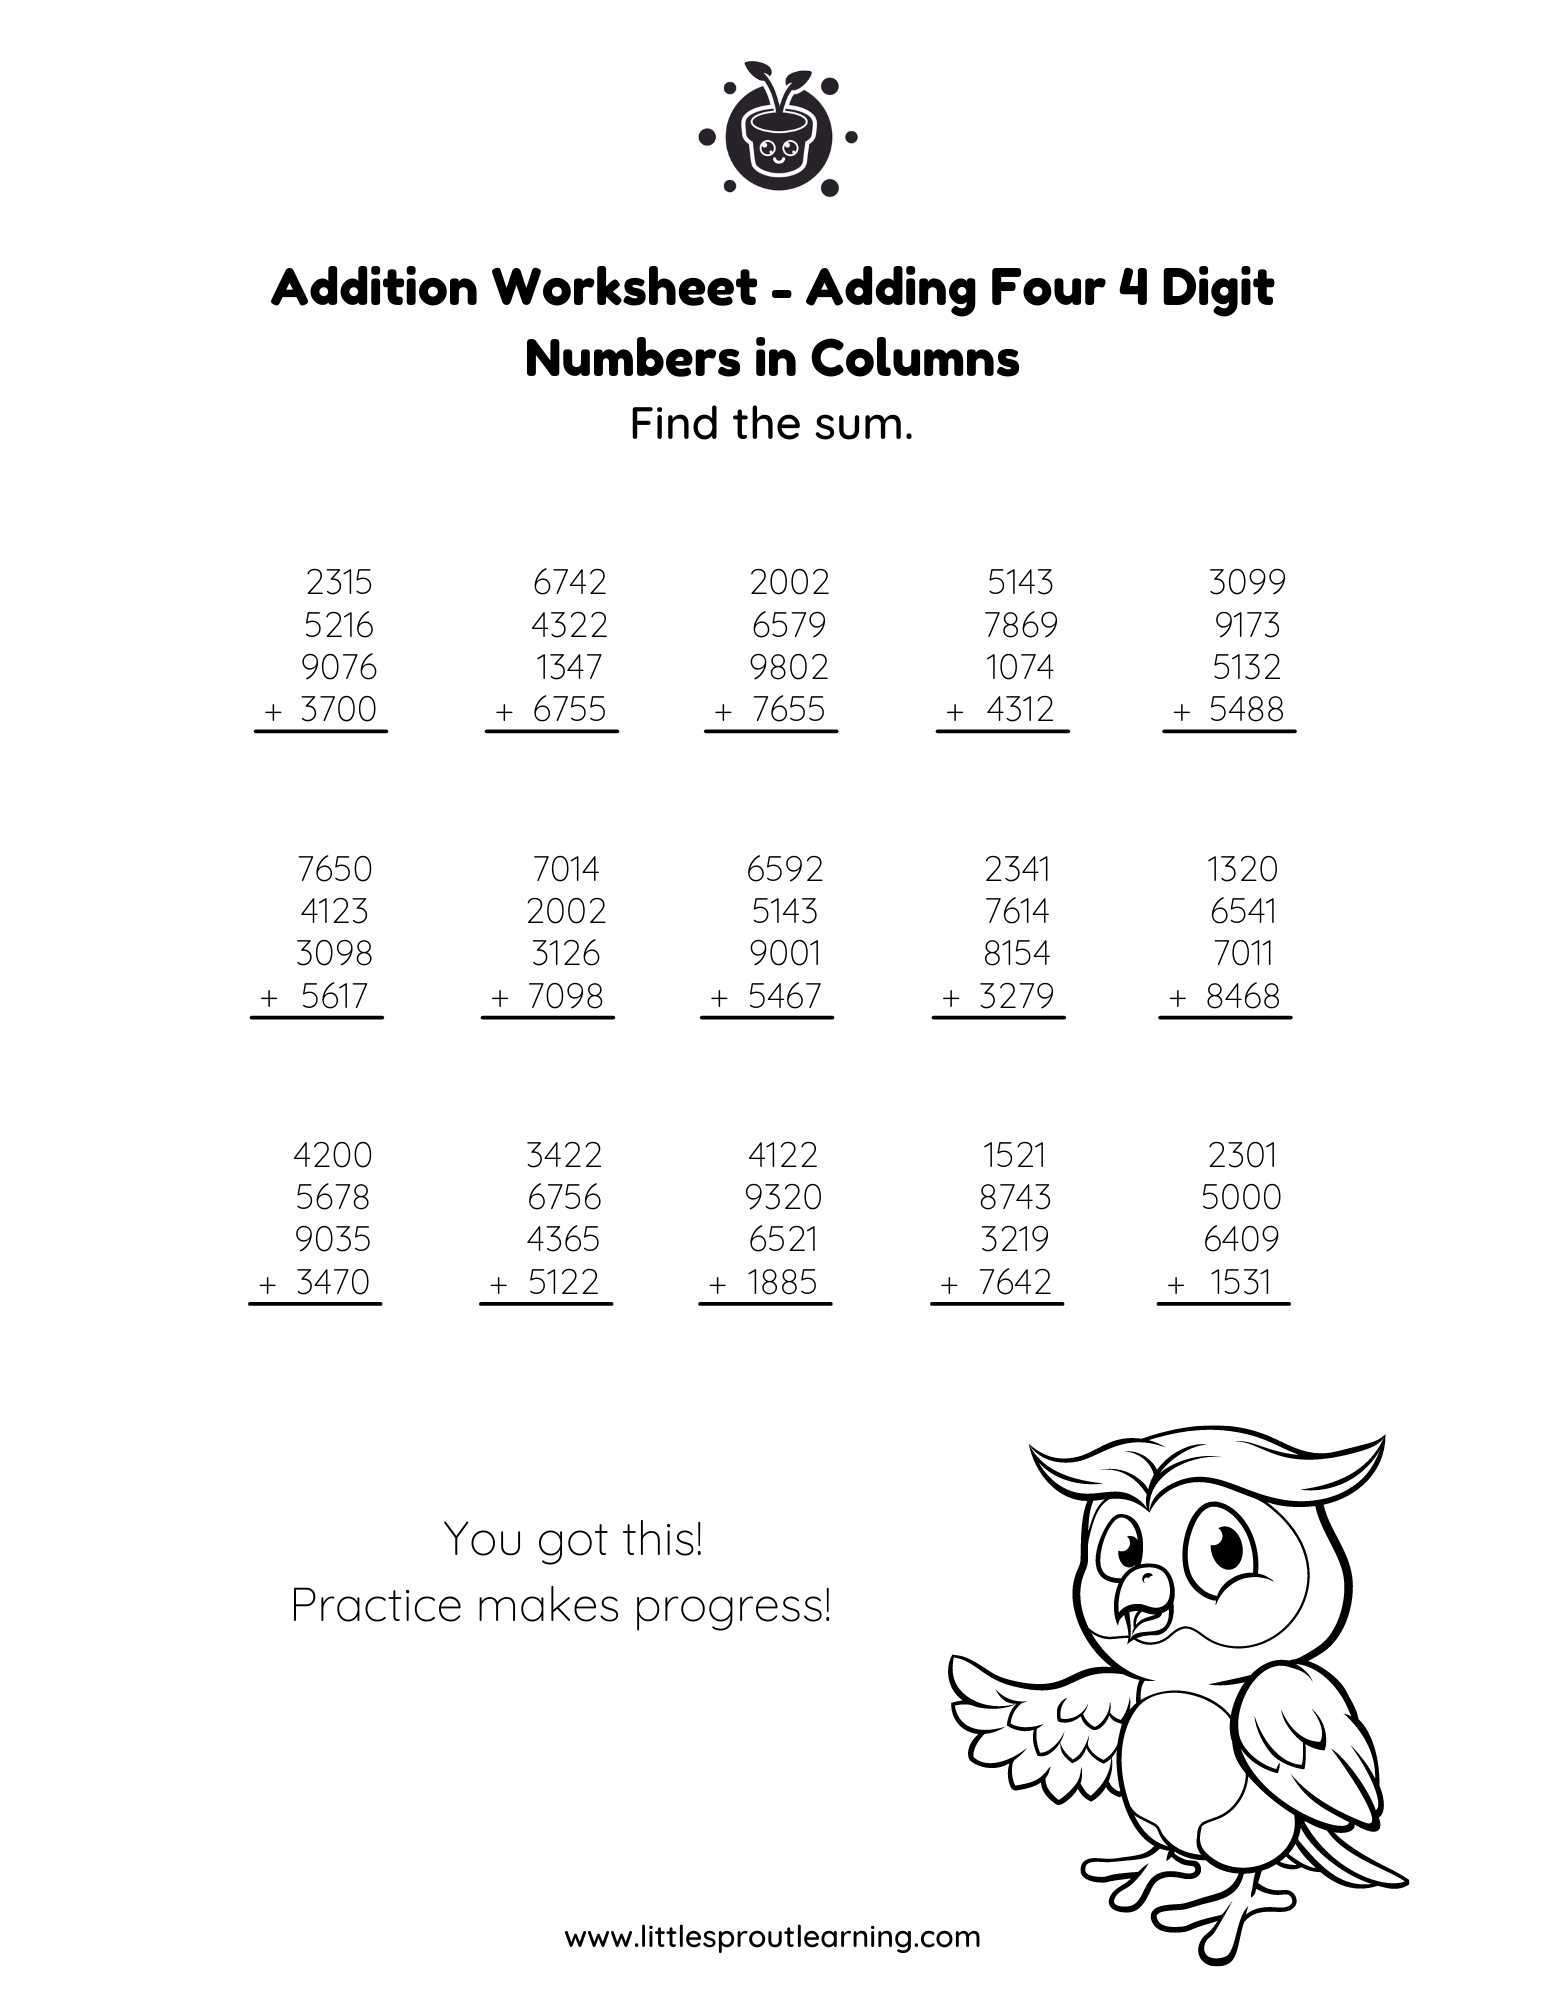 Math Practice Worksheet - Adding 4 four digit numbers in columns